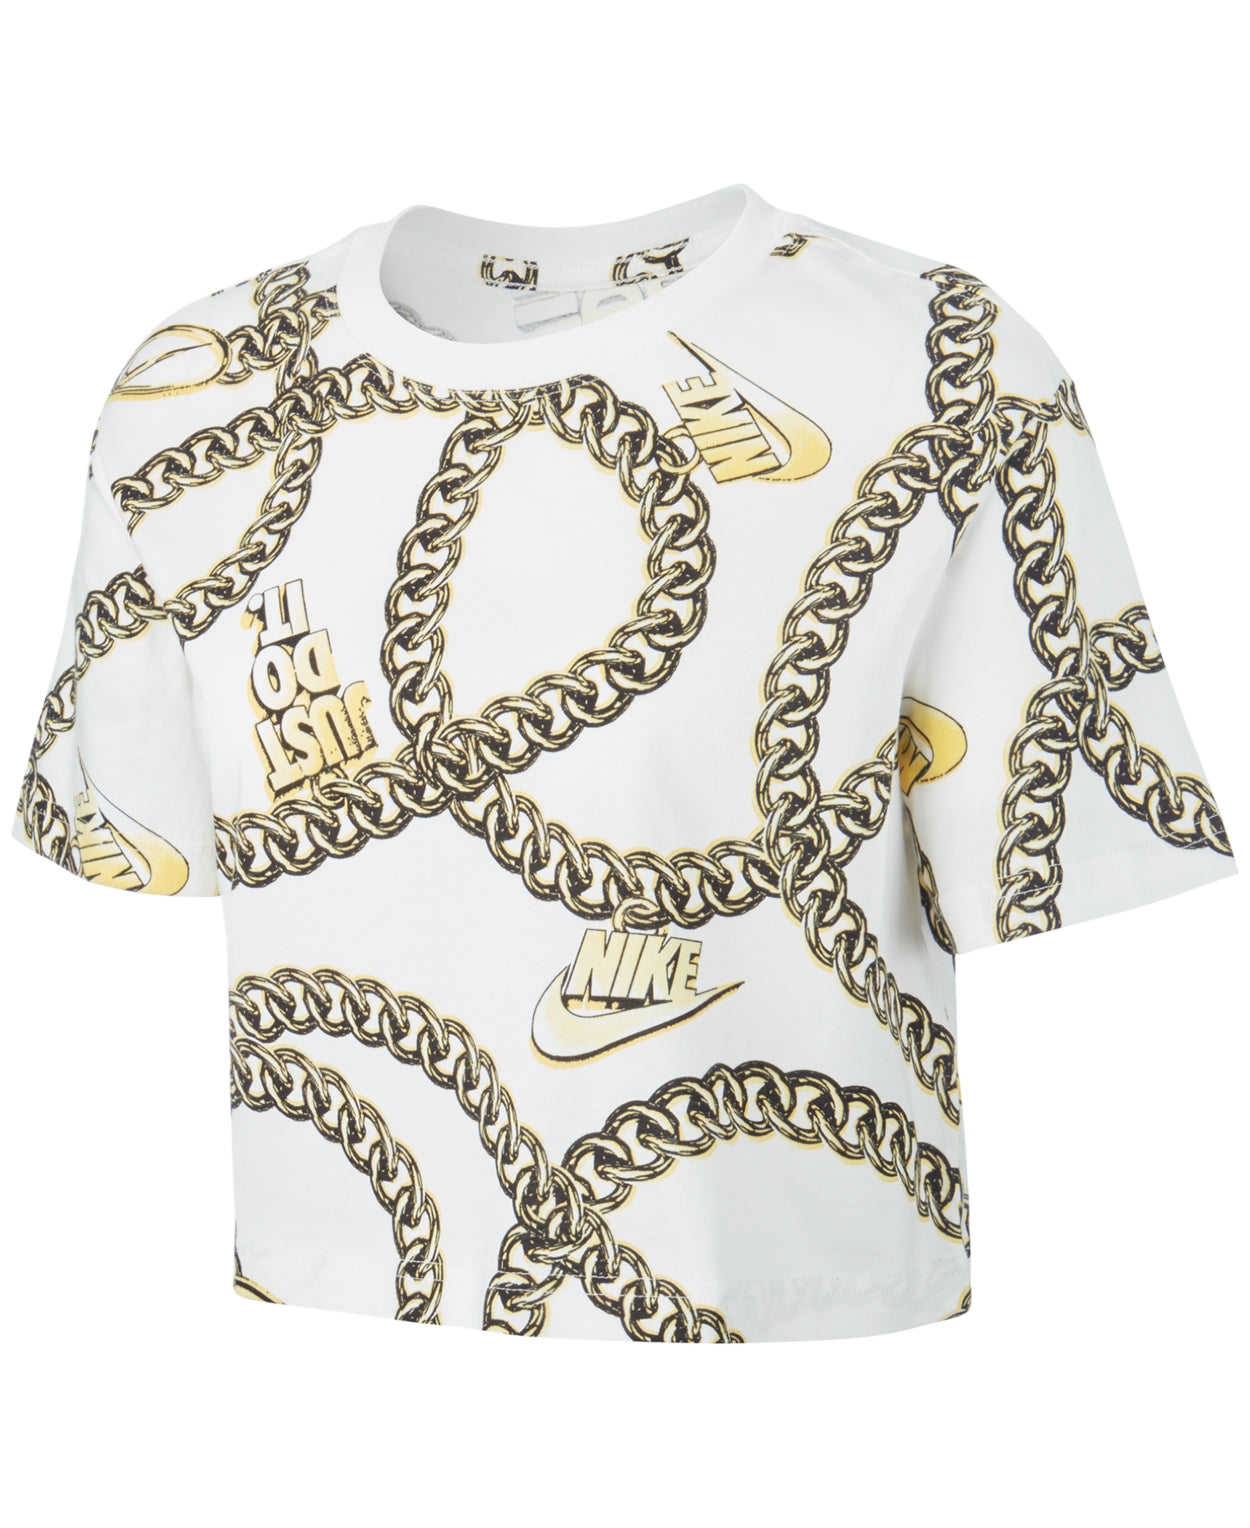 Nike Womens Glam Dunk Cotton Printed Cropped T-shirt